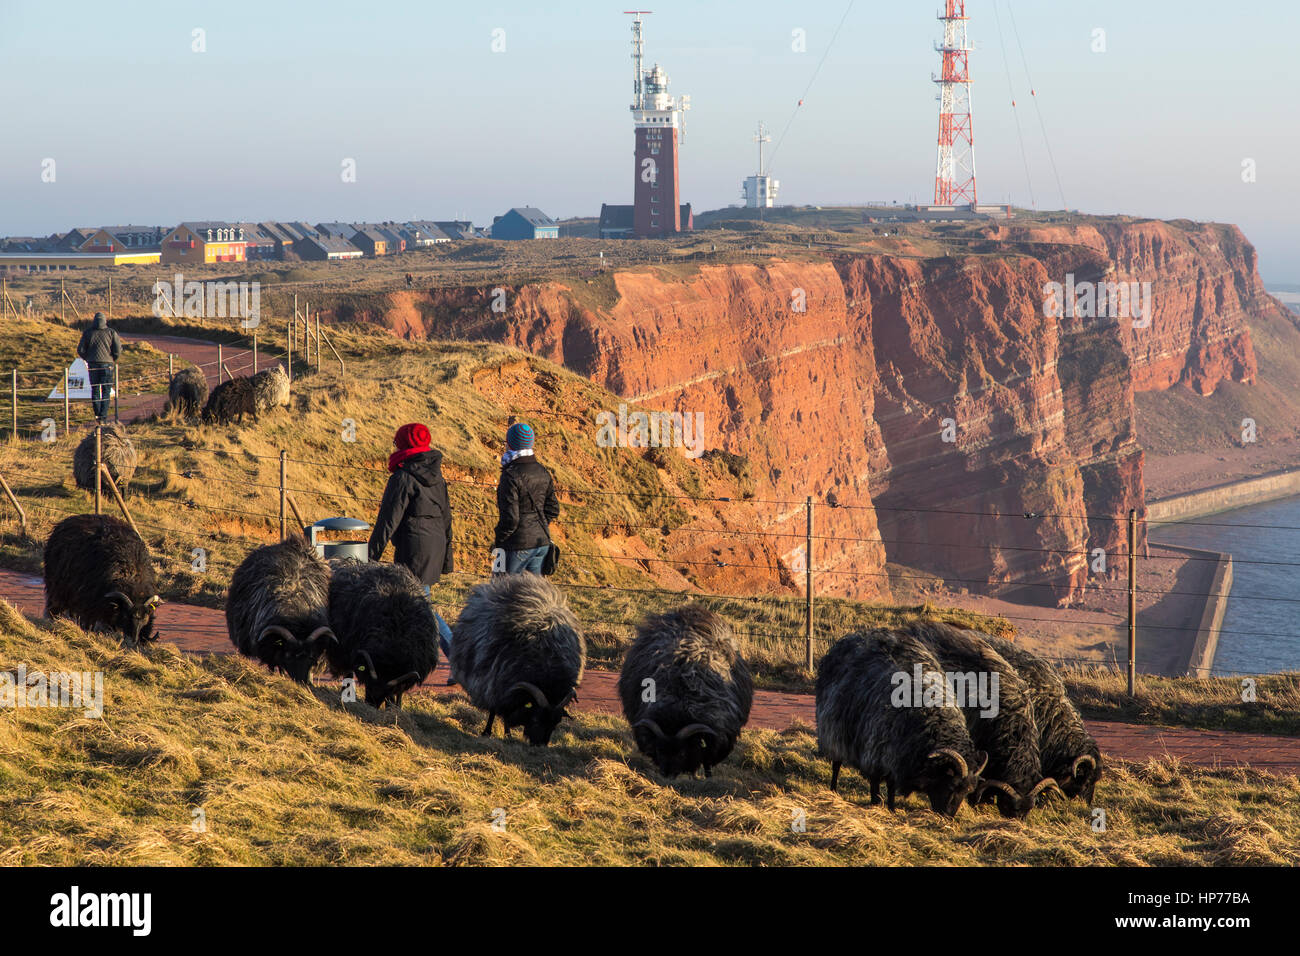 The red steep coast line of Helgoland, an German Island in the North Sea, lighthouse and radio-relay system antenna mast, flock of sheep, Stock Photo